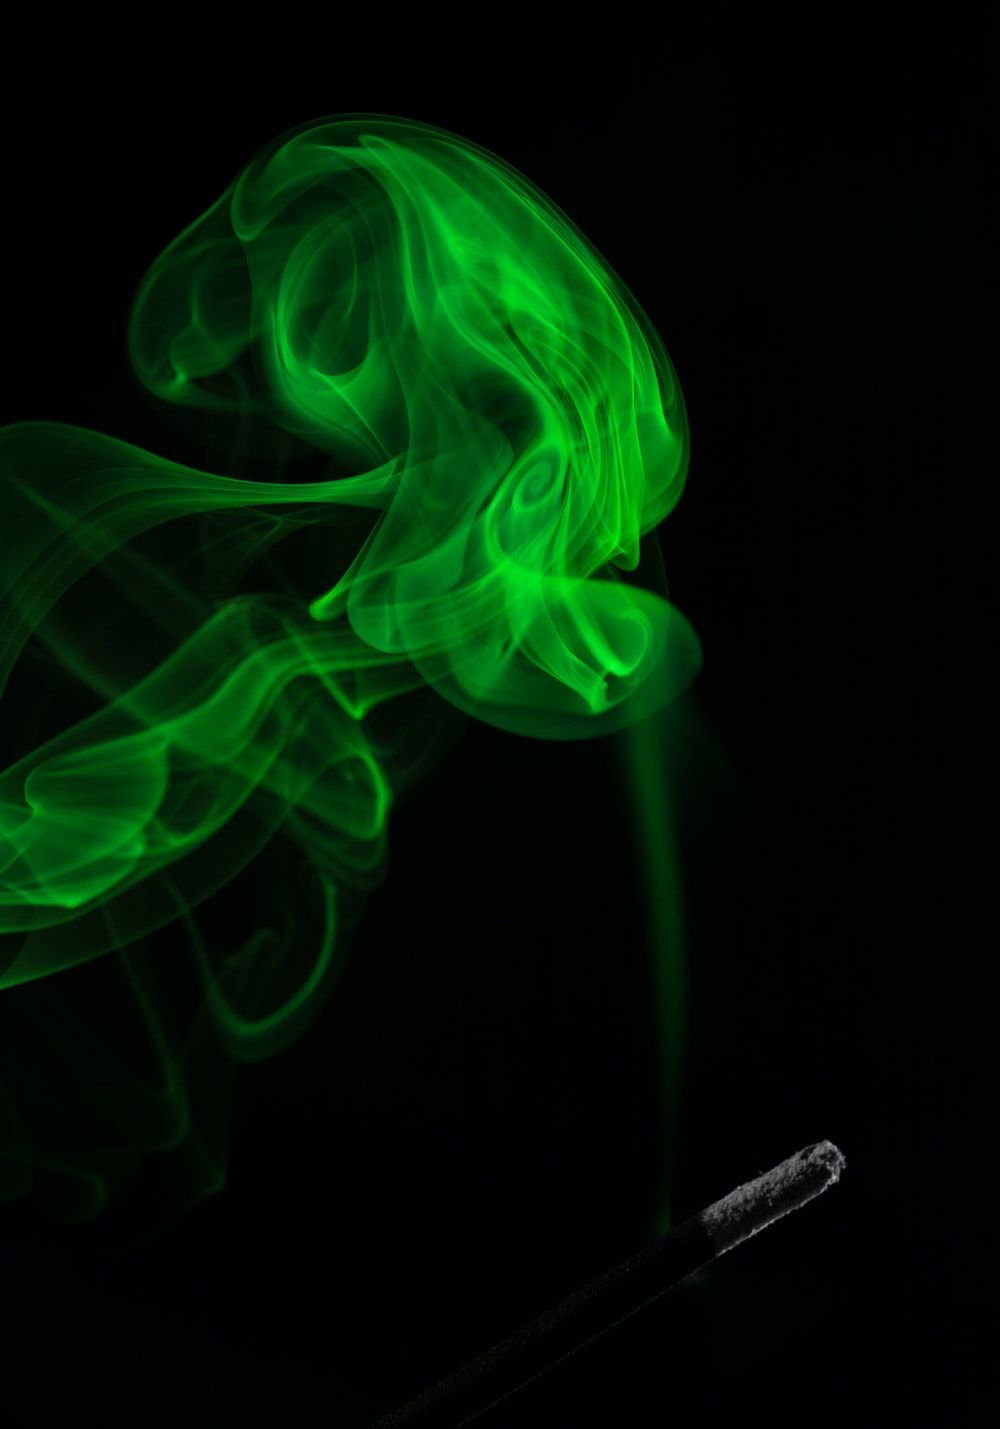 Smoke Weed Everyday Picture [HD]. Download Free Image